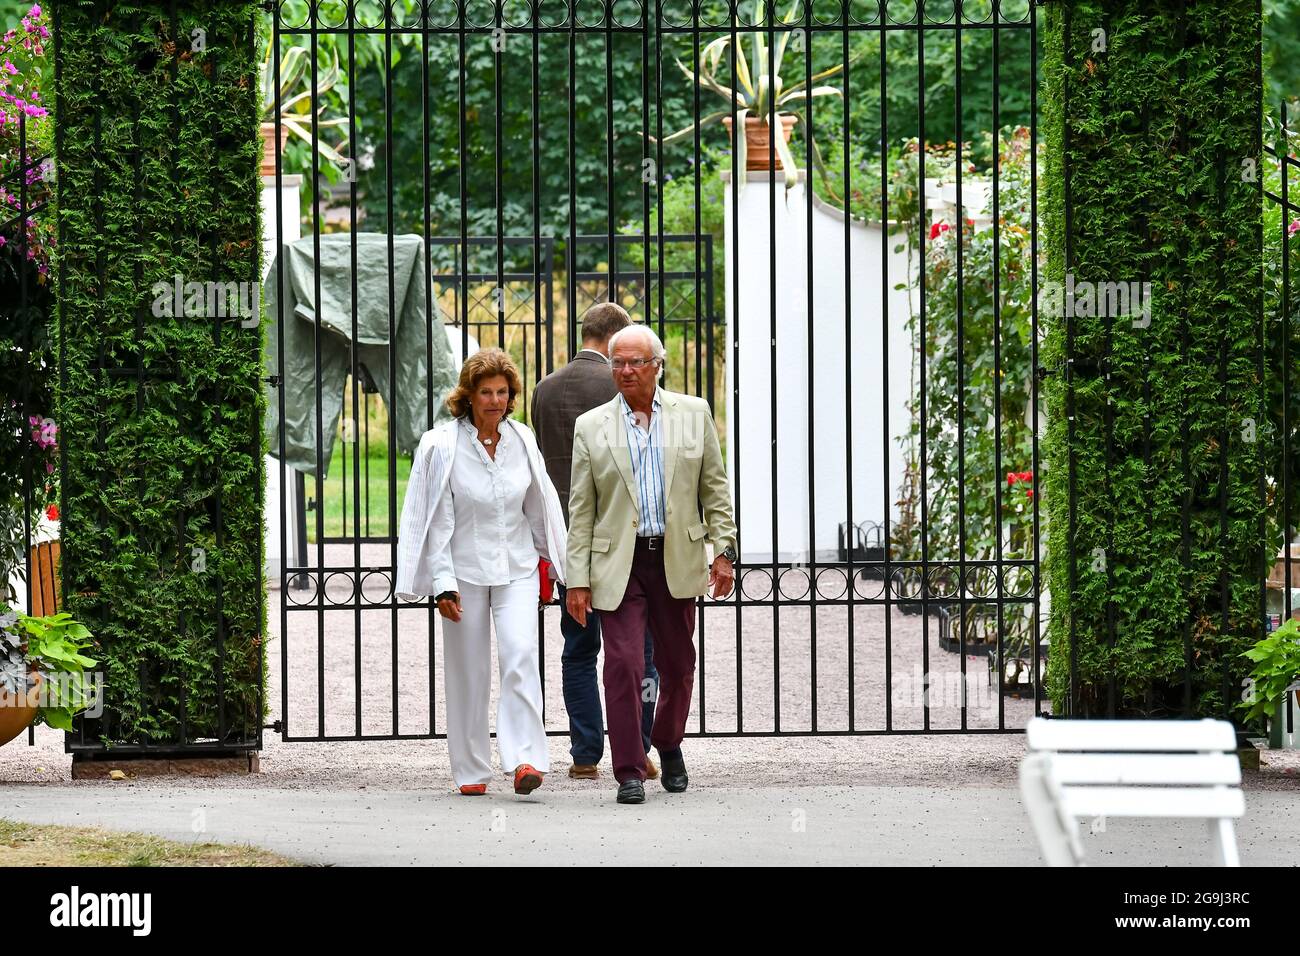 Sweden's Queen Silvia and king Carl Gustaf arriving at singer Lisa Nilsson's performance at Solliden Sessions at Solliden, Sweden, on July 26, 2021.Photo: Magnus Johnsson/TT kod 10530 Stock Photo